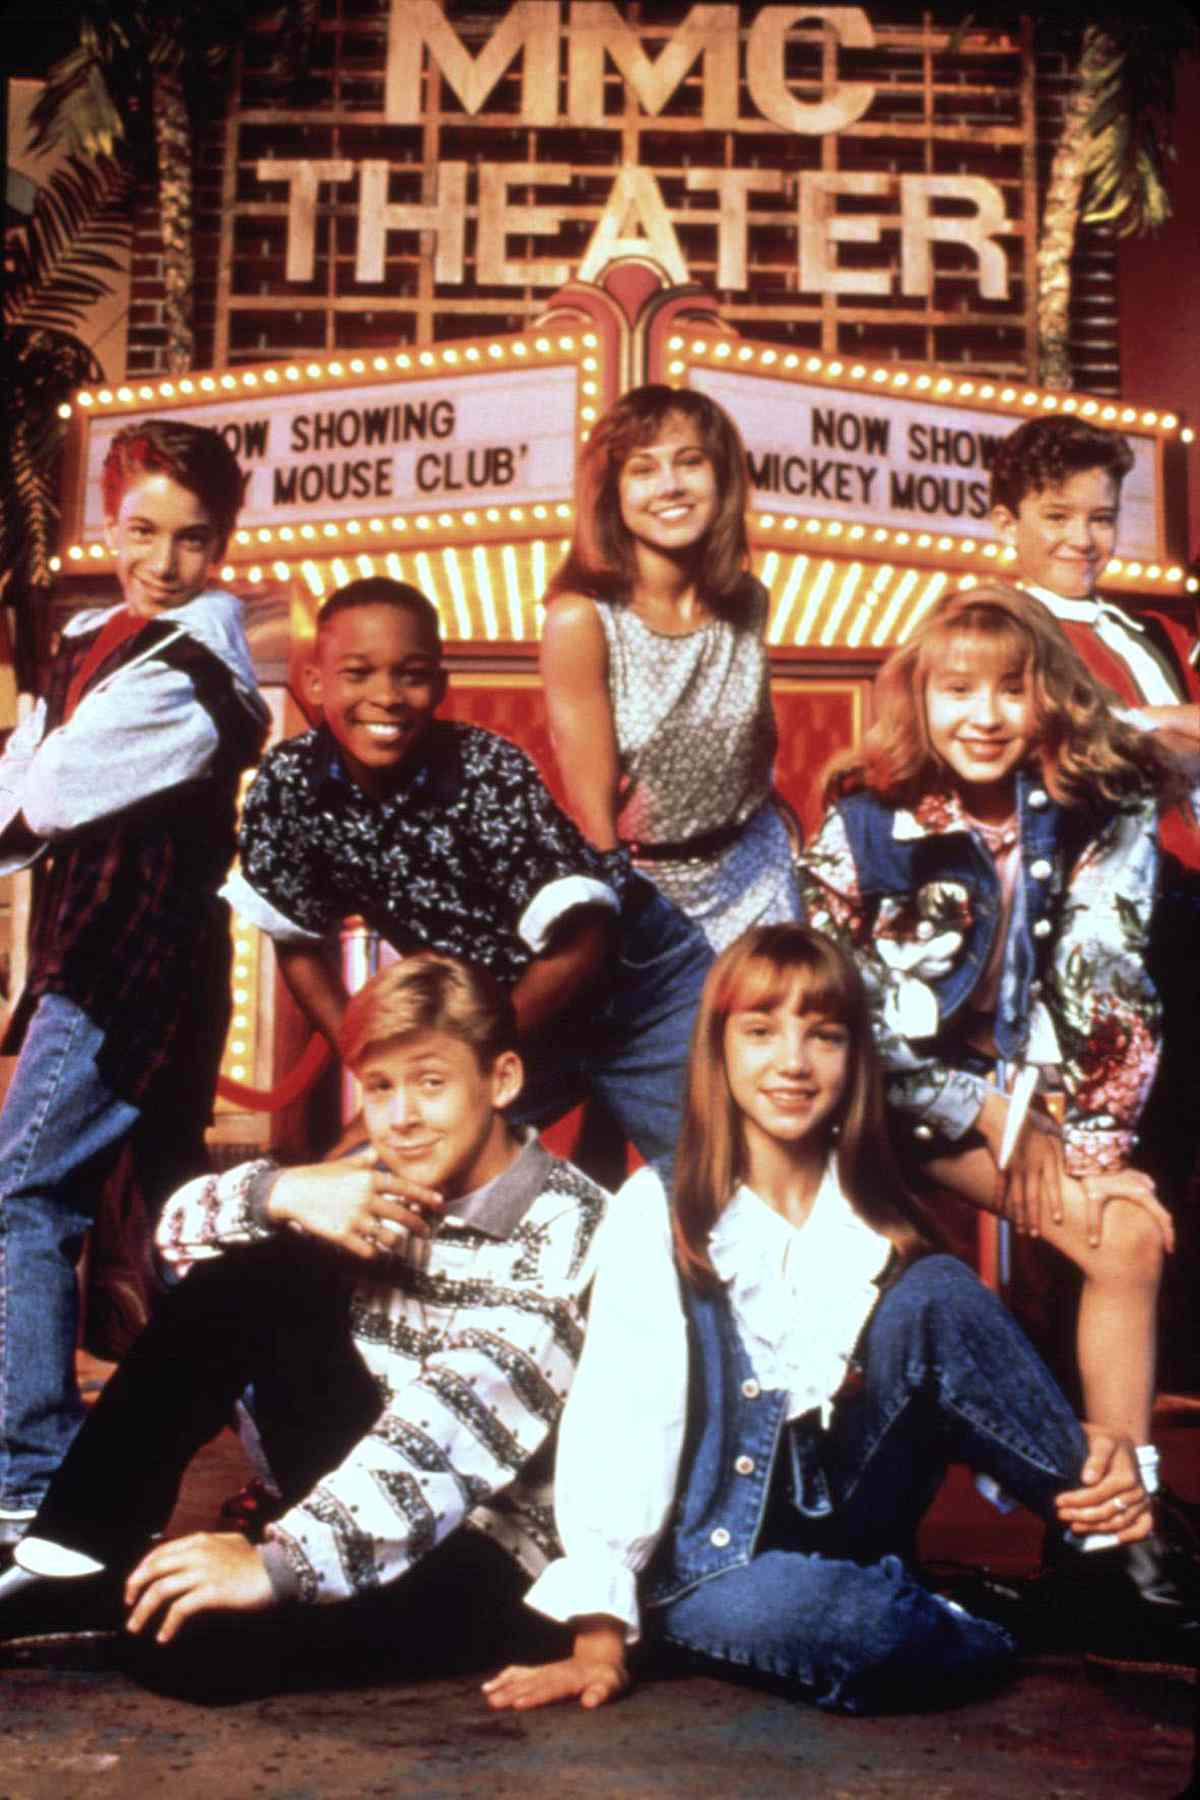 MICKEY MOUSE CLUB, (clockwise from upper left) T. J. Fantini, Tate Lynche, Ryan Gosling, Nikki Deloach, Britney Spears, Christina Aguilera, Justin Timberlake, 1989-1994